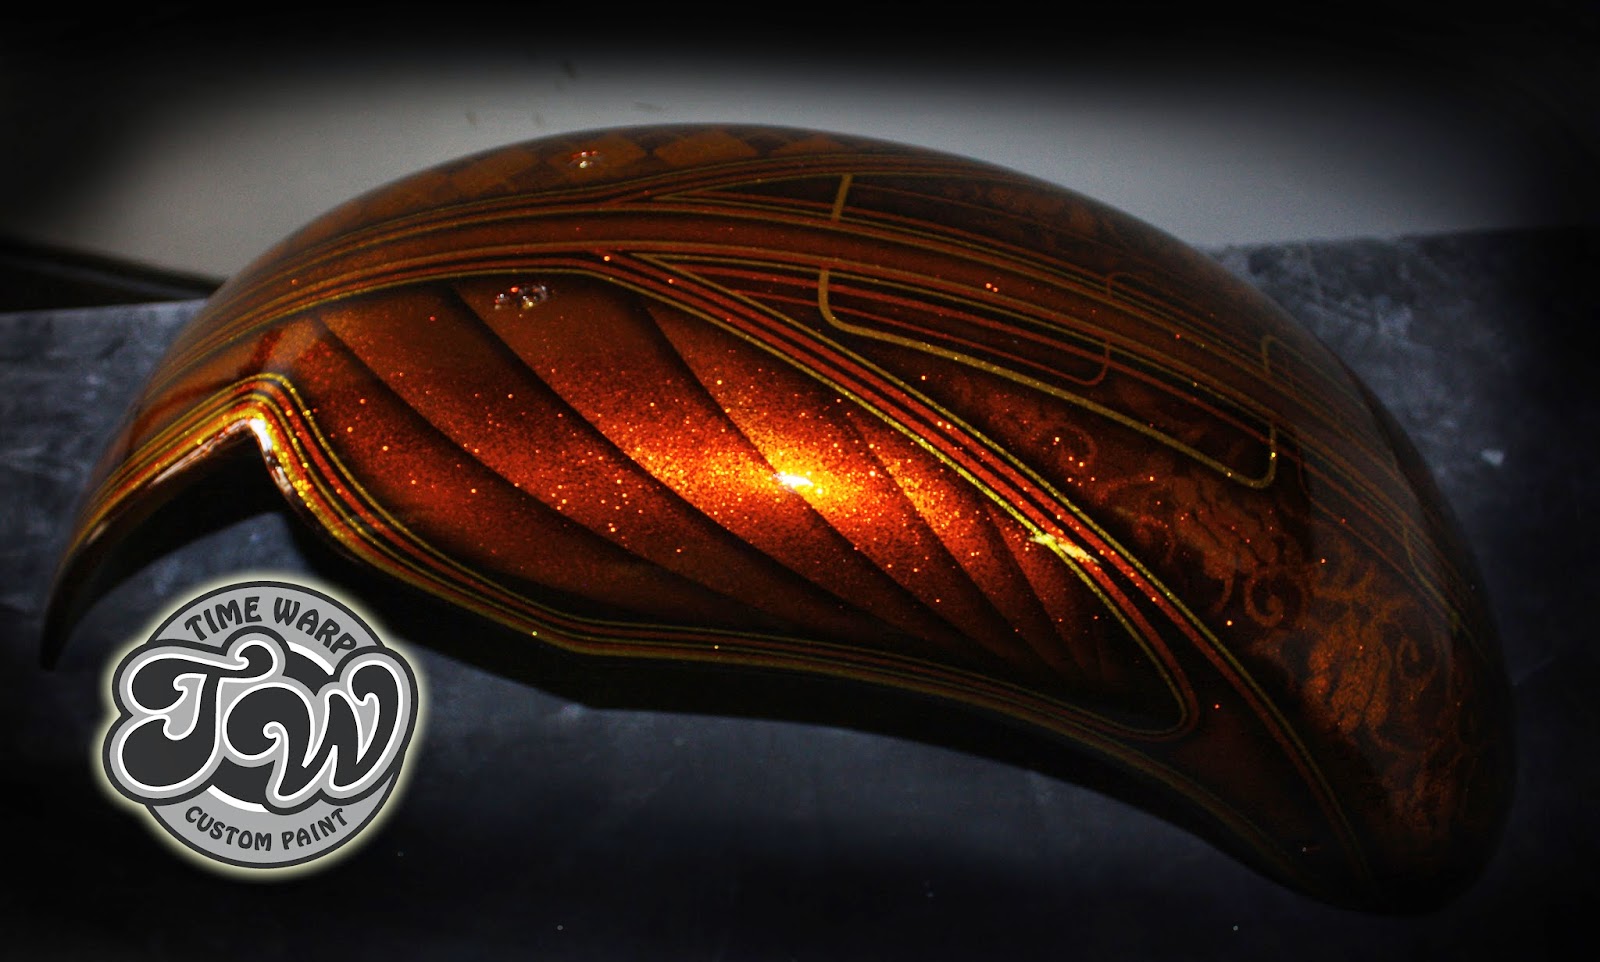 Online Motorcycle Paint Shop: Brown and gold Metal flake